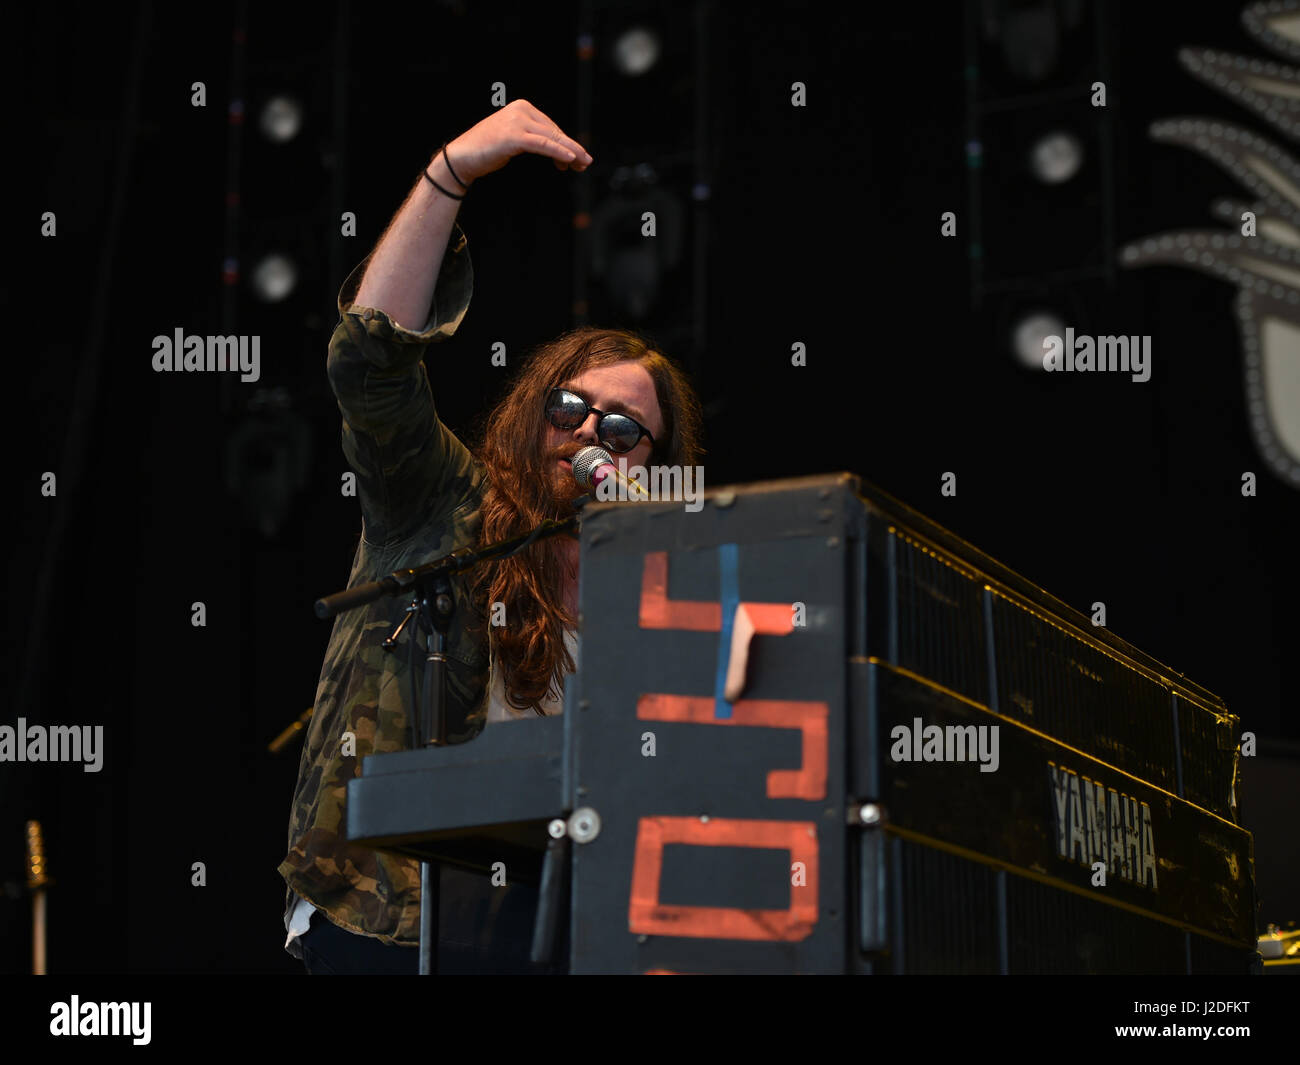 Portsmouth, VIRGINIA, USA. 26th Apr, 2017. J. RODDY WALSTON AND THE BUSINESS, american rock band gets the crowd started at the .to THE PORTSMOUTH PAVILION in PORTSMOUTH, VIRGINIA on 26 APRIL 2017. © Jeff Moore 2017 Credit: Jeff Moore/ZUMA Wire/Alamy Live News Stock Photo